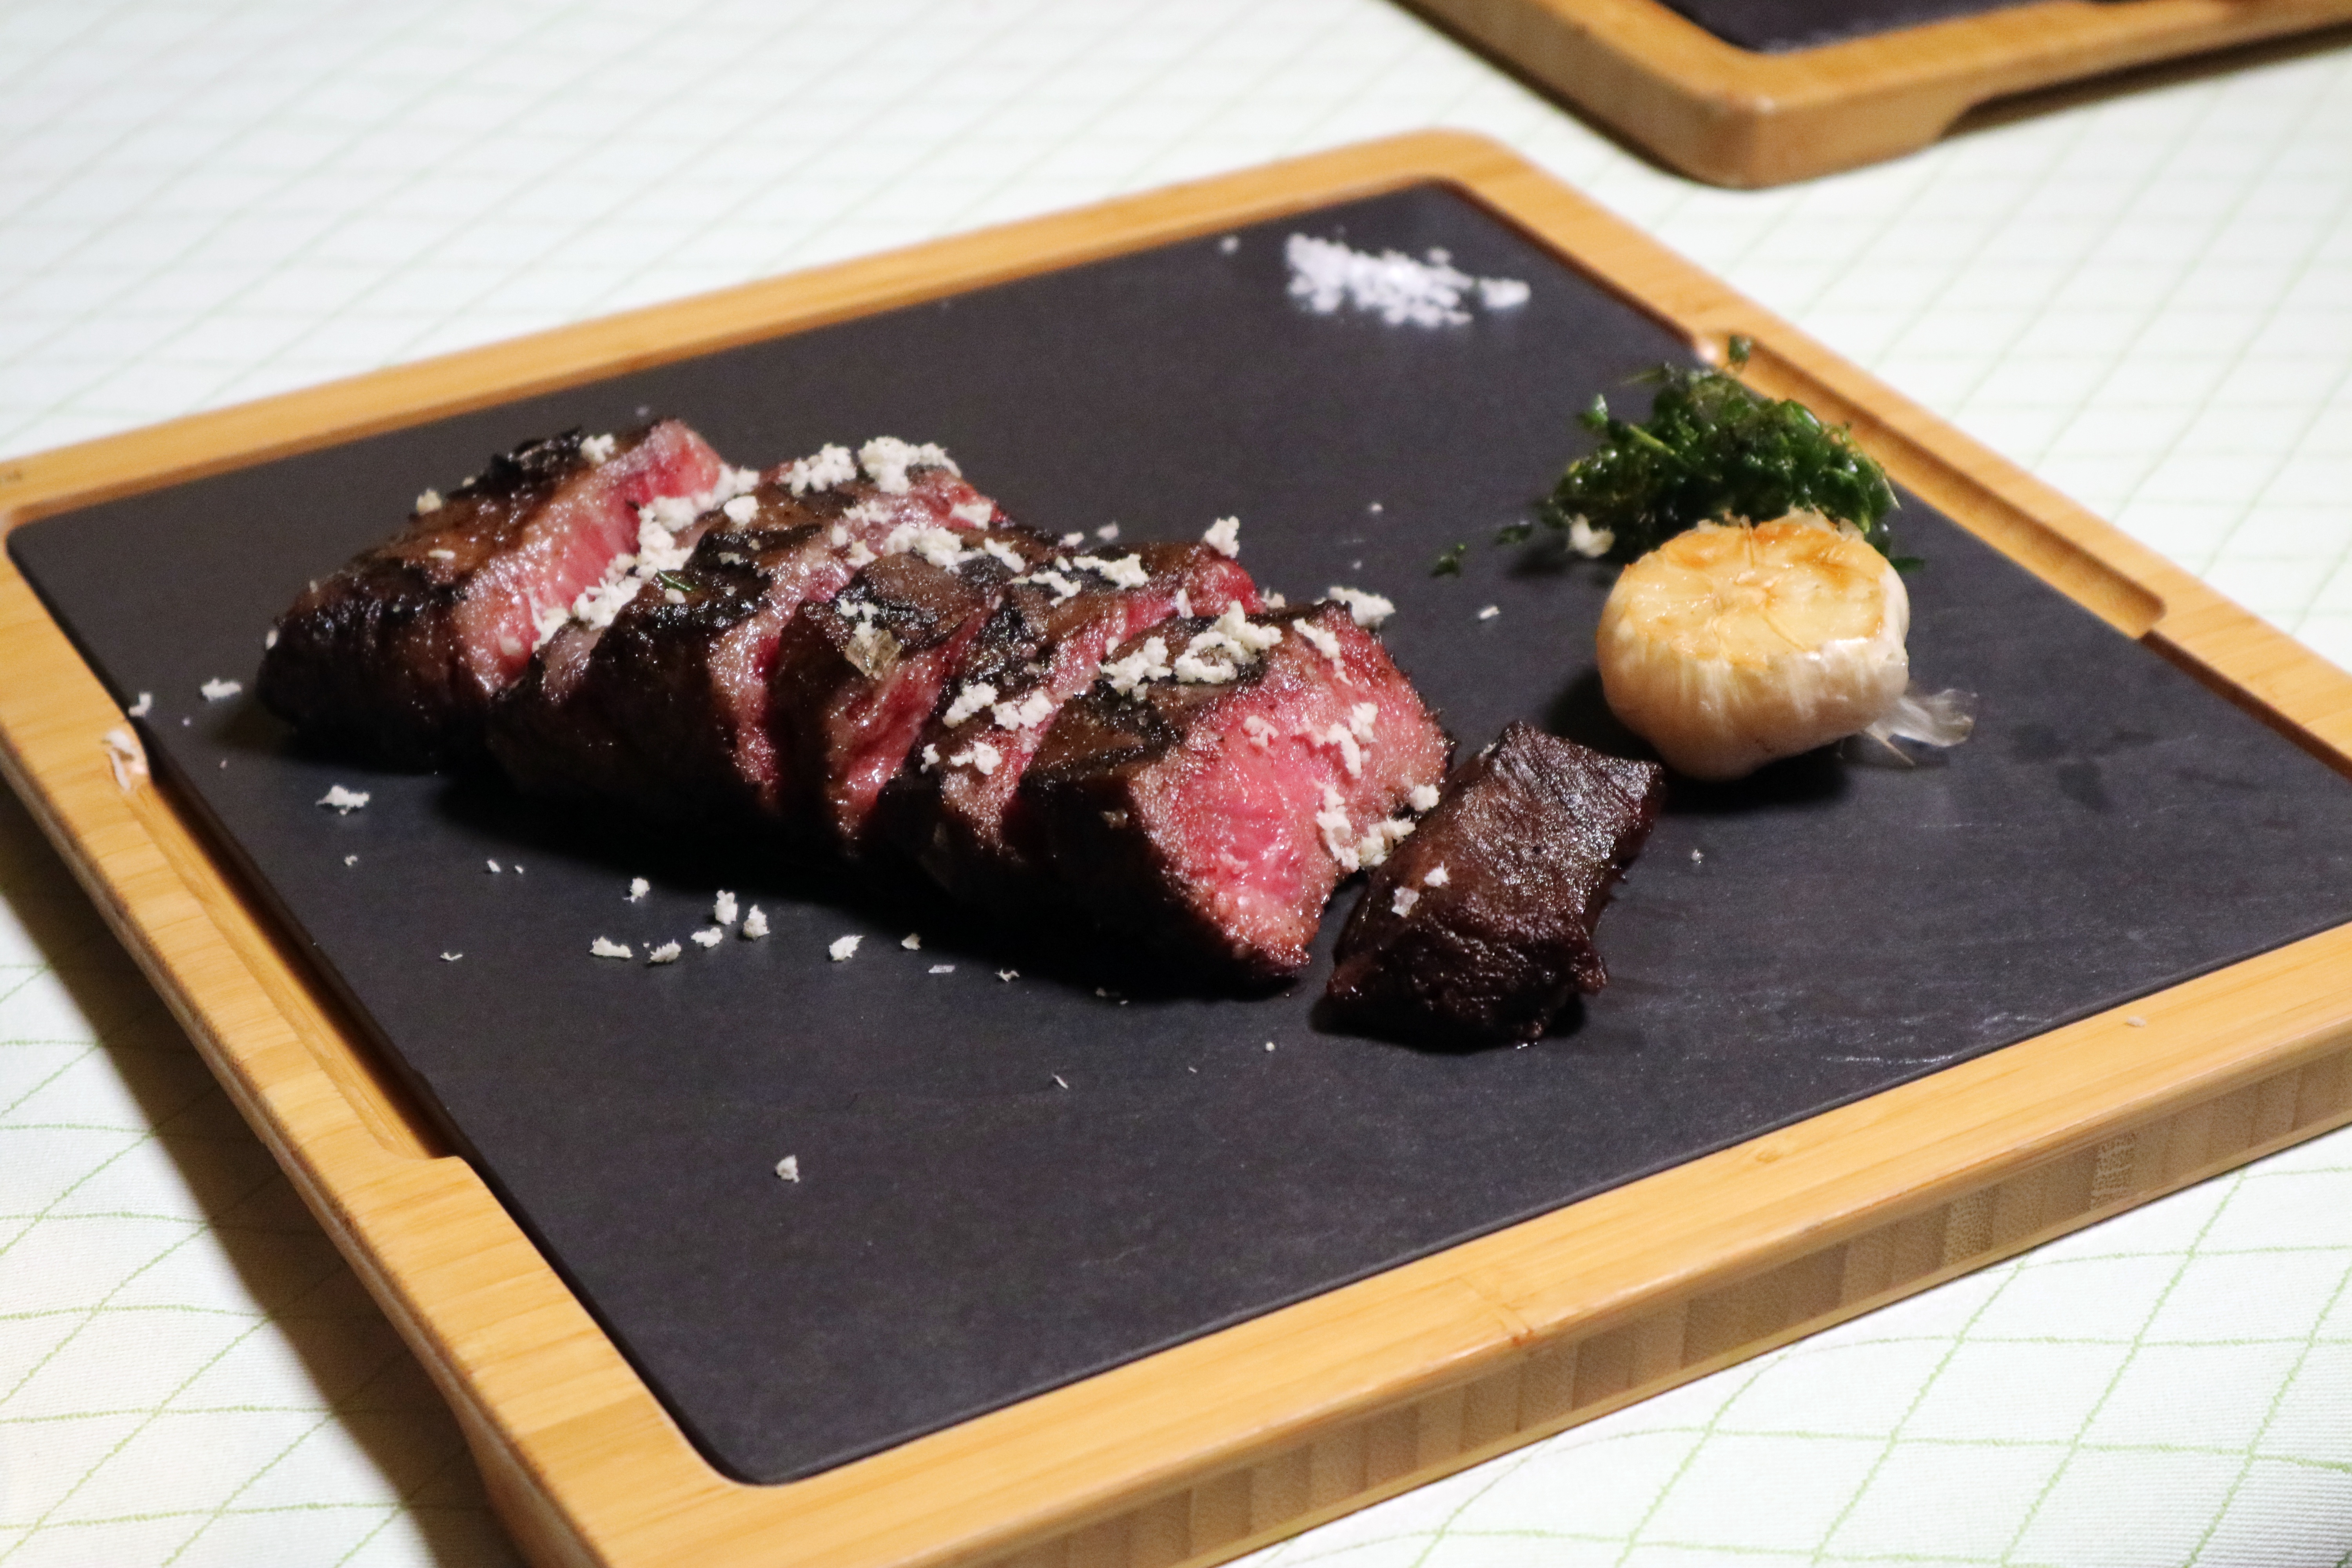 Snake River Wagyu Beef steak, one of the premium offerings of Solaire’s Finestra Italian Steakhouse.